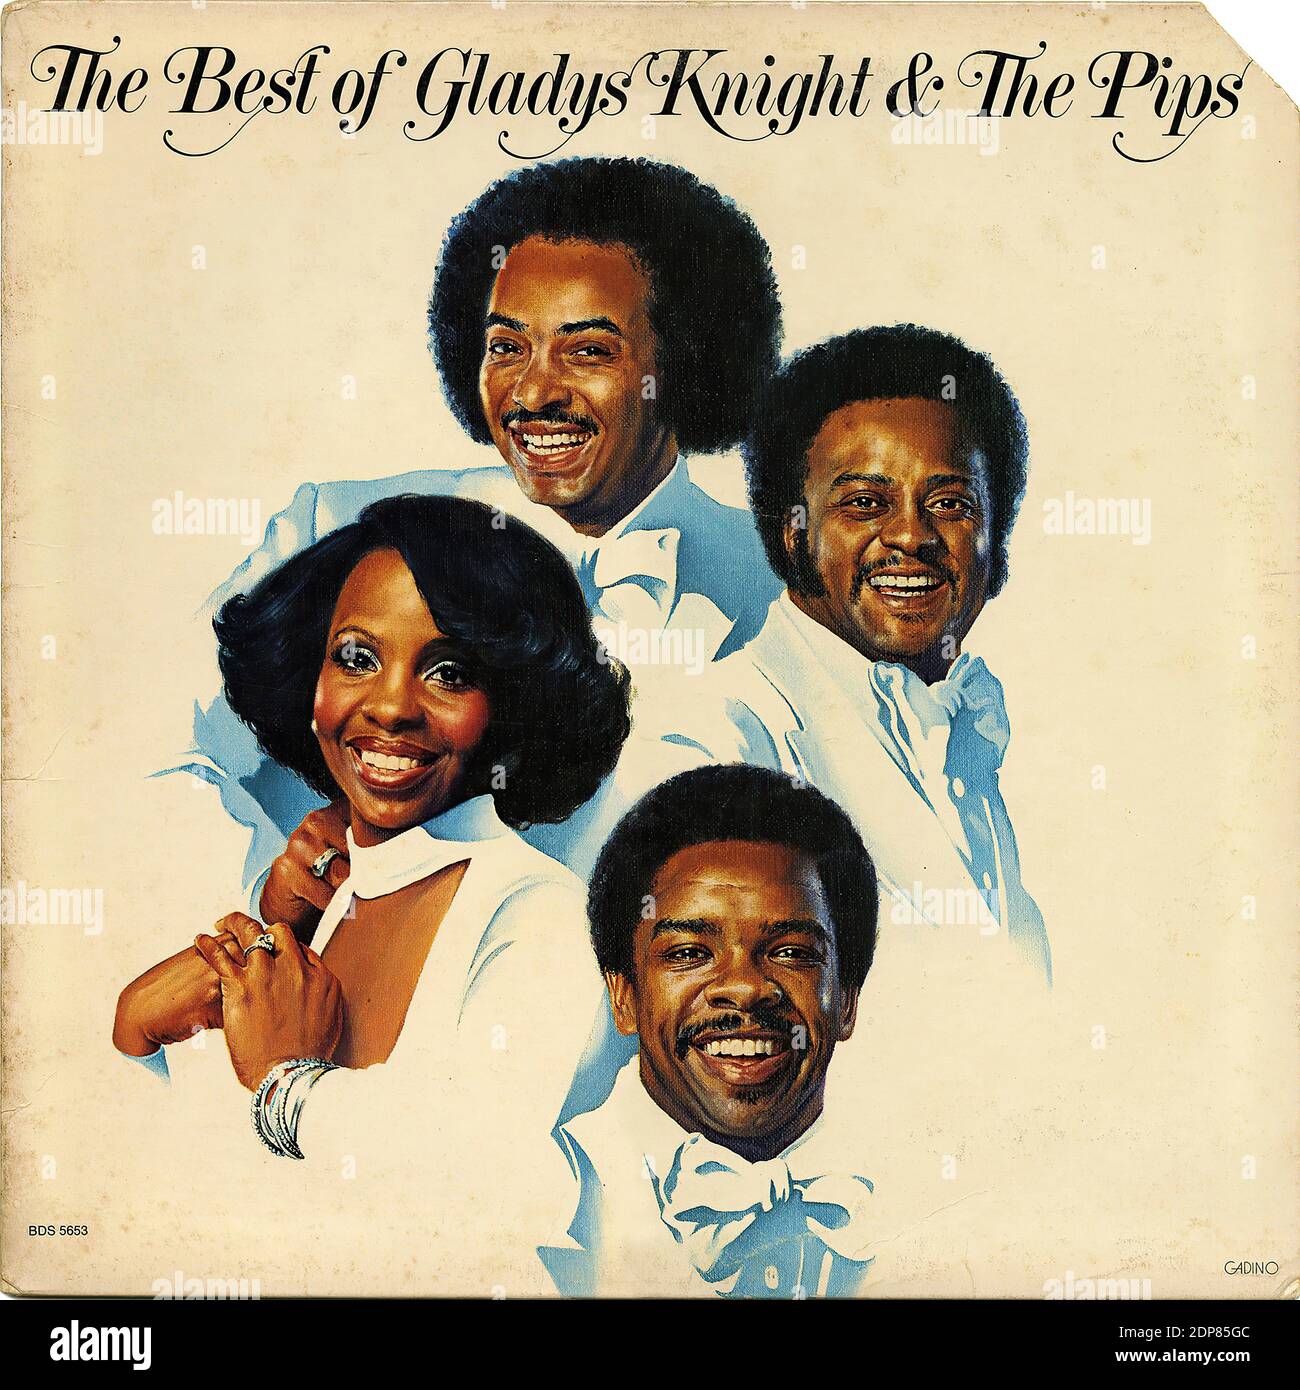 The Best of Gladys Knight and the Pips - Vintage Record Cover Stock Photo